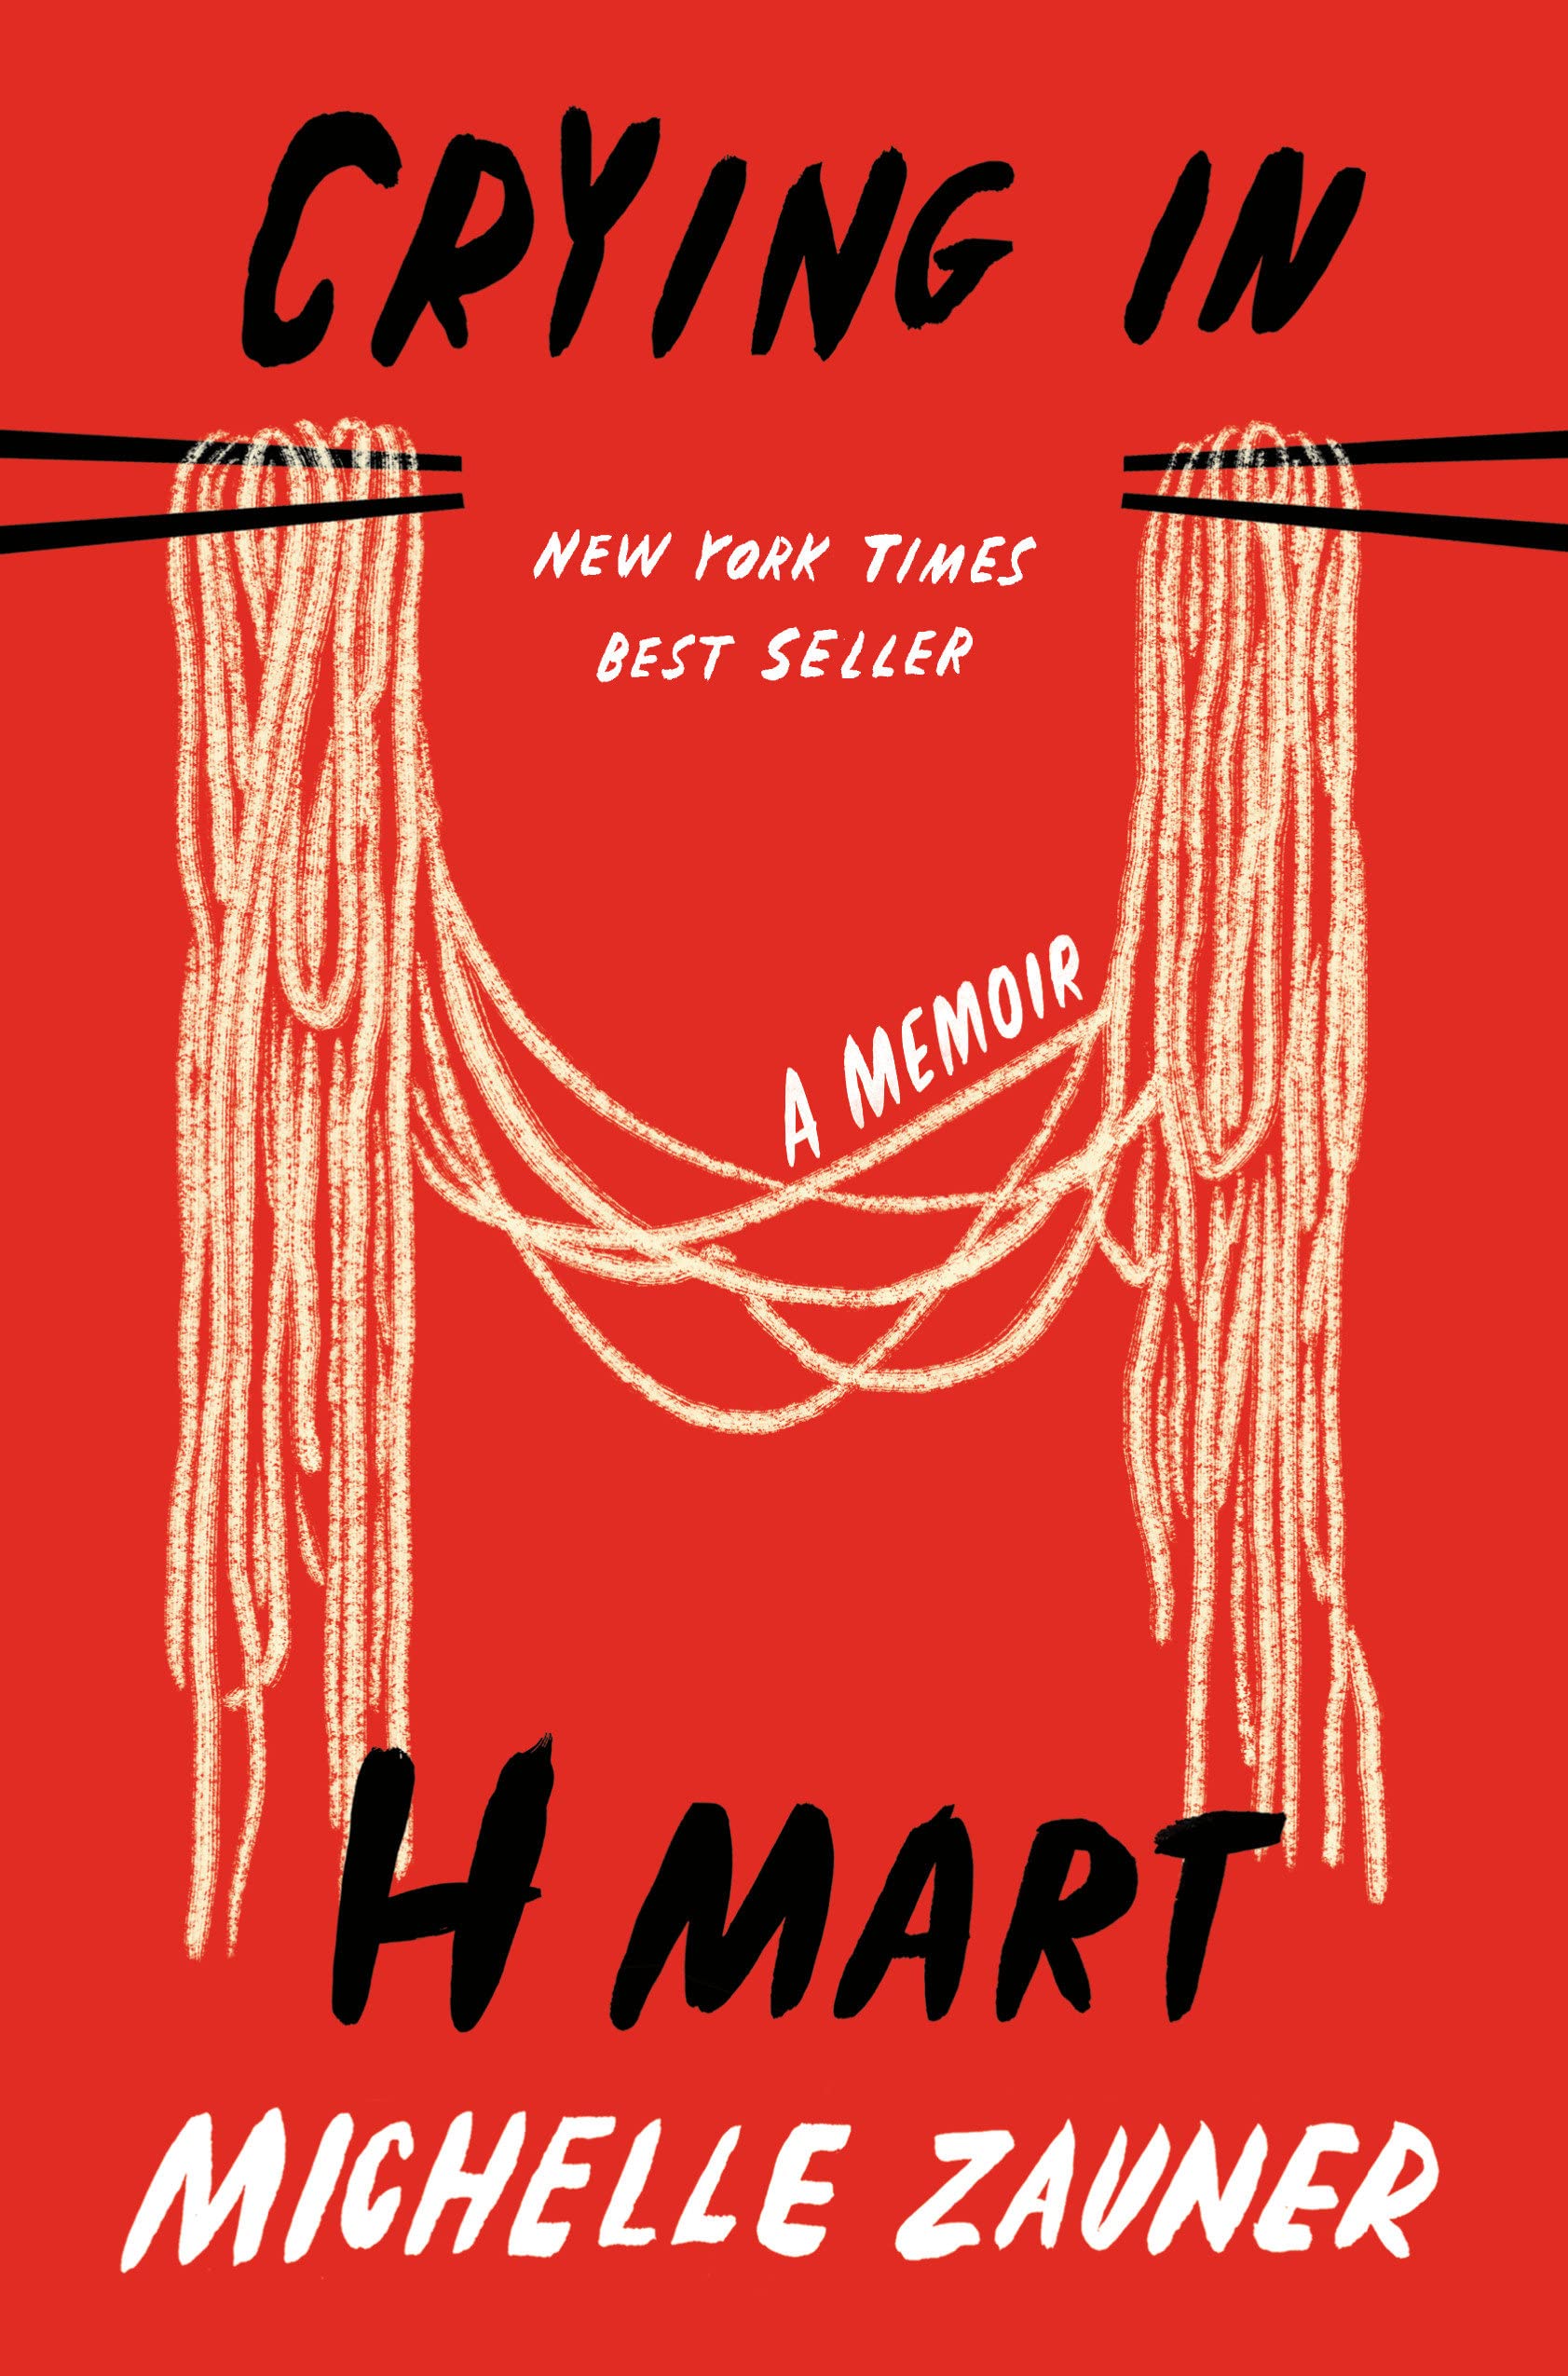 Graphic image of the book cover of Crying in H Mart